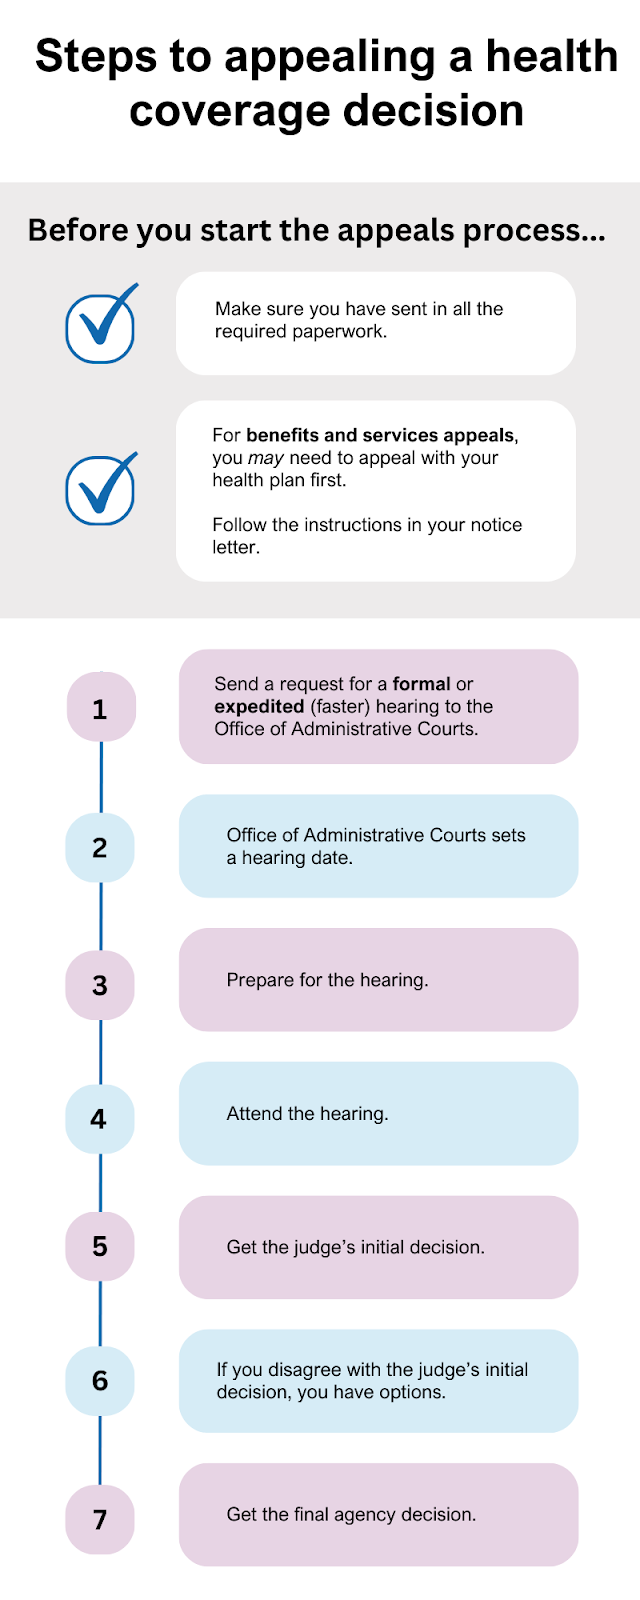 There are two things to consider before you start the appeals process: Make sure you have sent in all the required paperwork. Also, for benefits and services appeals, you MAY need to appeal with your health plan first. Follow the instructions in your notice letter. Step 1 of the appeals process is to send a request for a formal or expedited (faster) hearing to the Office of Administrative Courts. Step 2 is when the Office of Administrative Courts sets a hearing date. Steps 3 and 4 are preparing for and attending the hearing. Step 5 is getting the judge’s initial decision. Step 6 describes the options available if you disagree with the judge’s initial decision. Step 7 is getting the final agency decision.